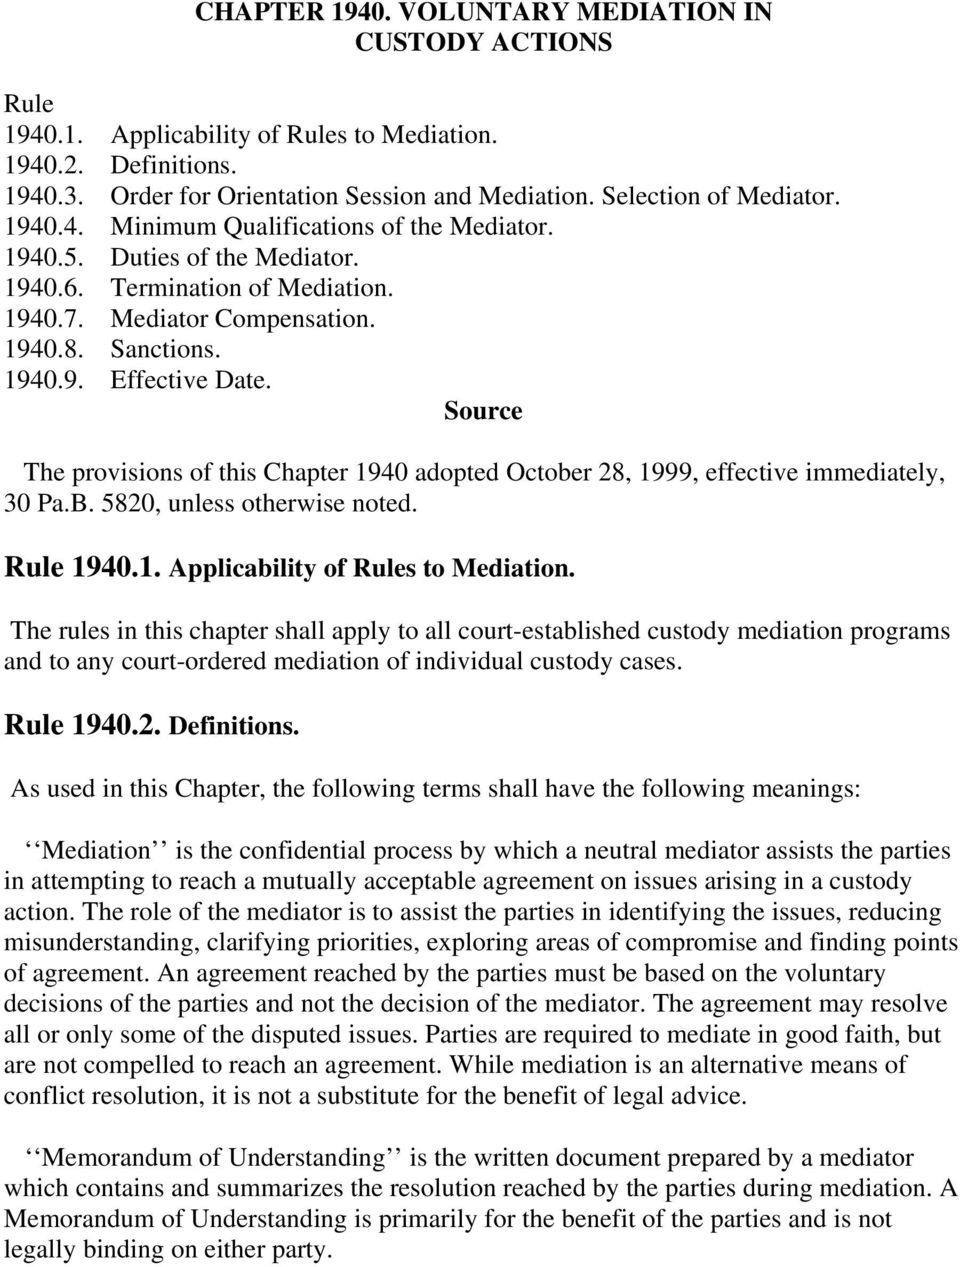 Source The provisions of this Chapter 1940 adopted October 28, 1999, effective immediately, 30 Pa.B. 5820, unless otherwise noted. Rule 1940.1. Applicability of Rules to Mediation.